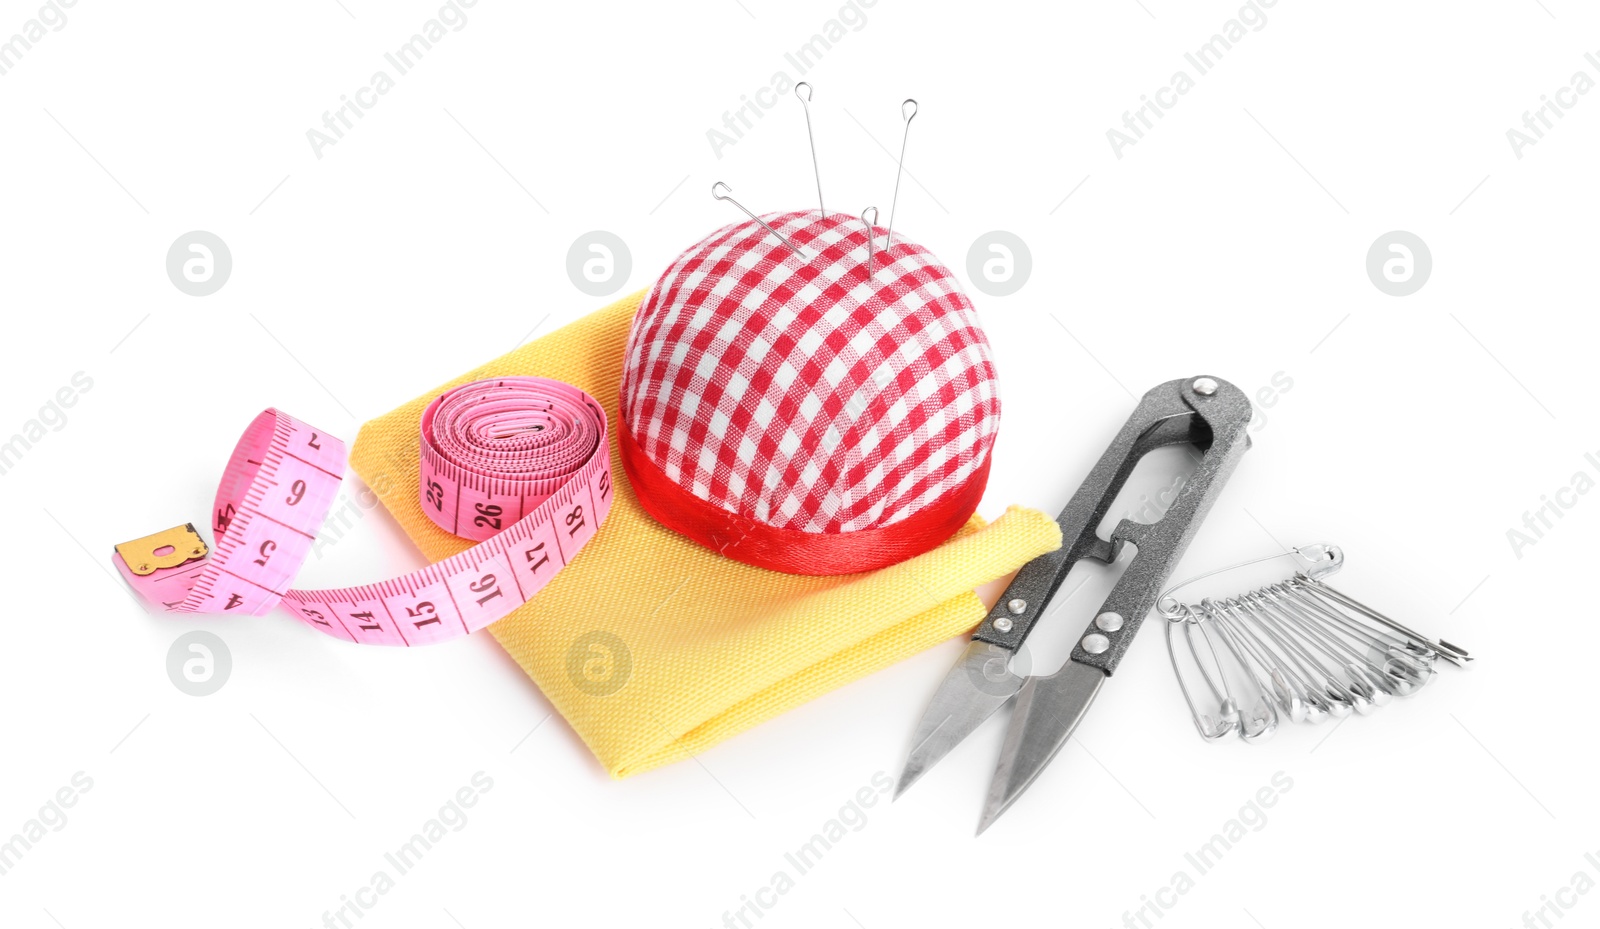 Photo of Pincushion, sewing needles, cutter, safety pins, cloth and measuring tape isolated on white